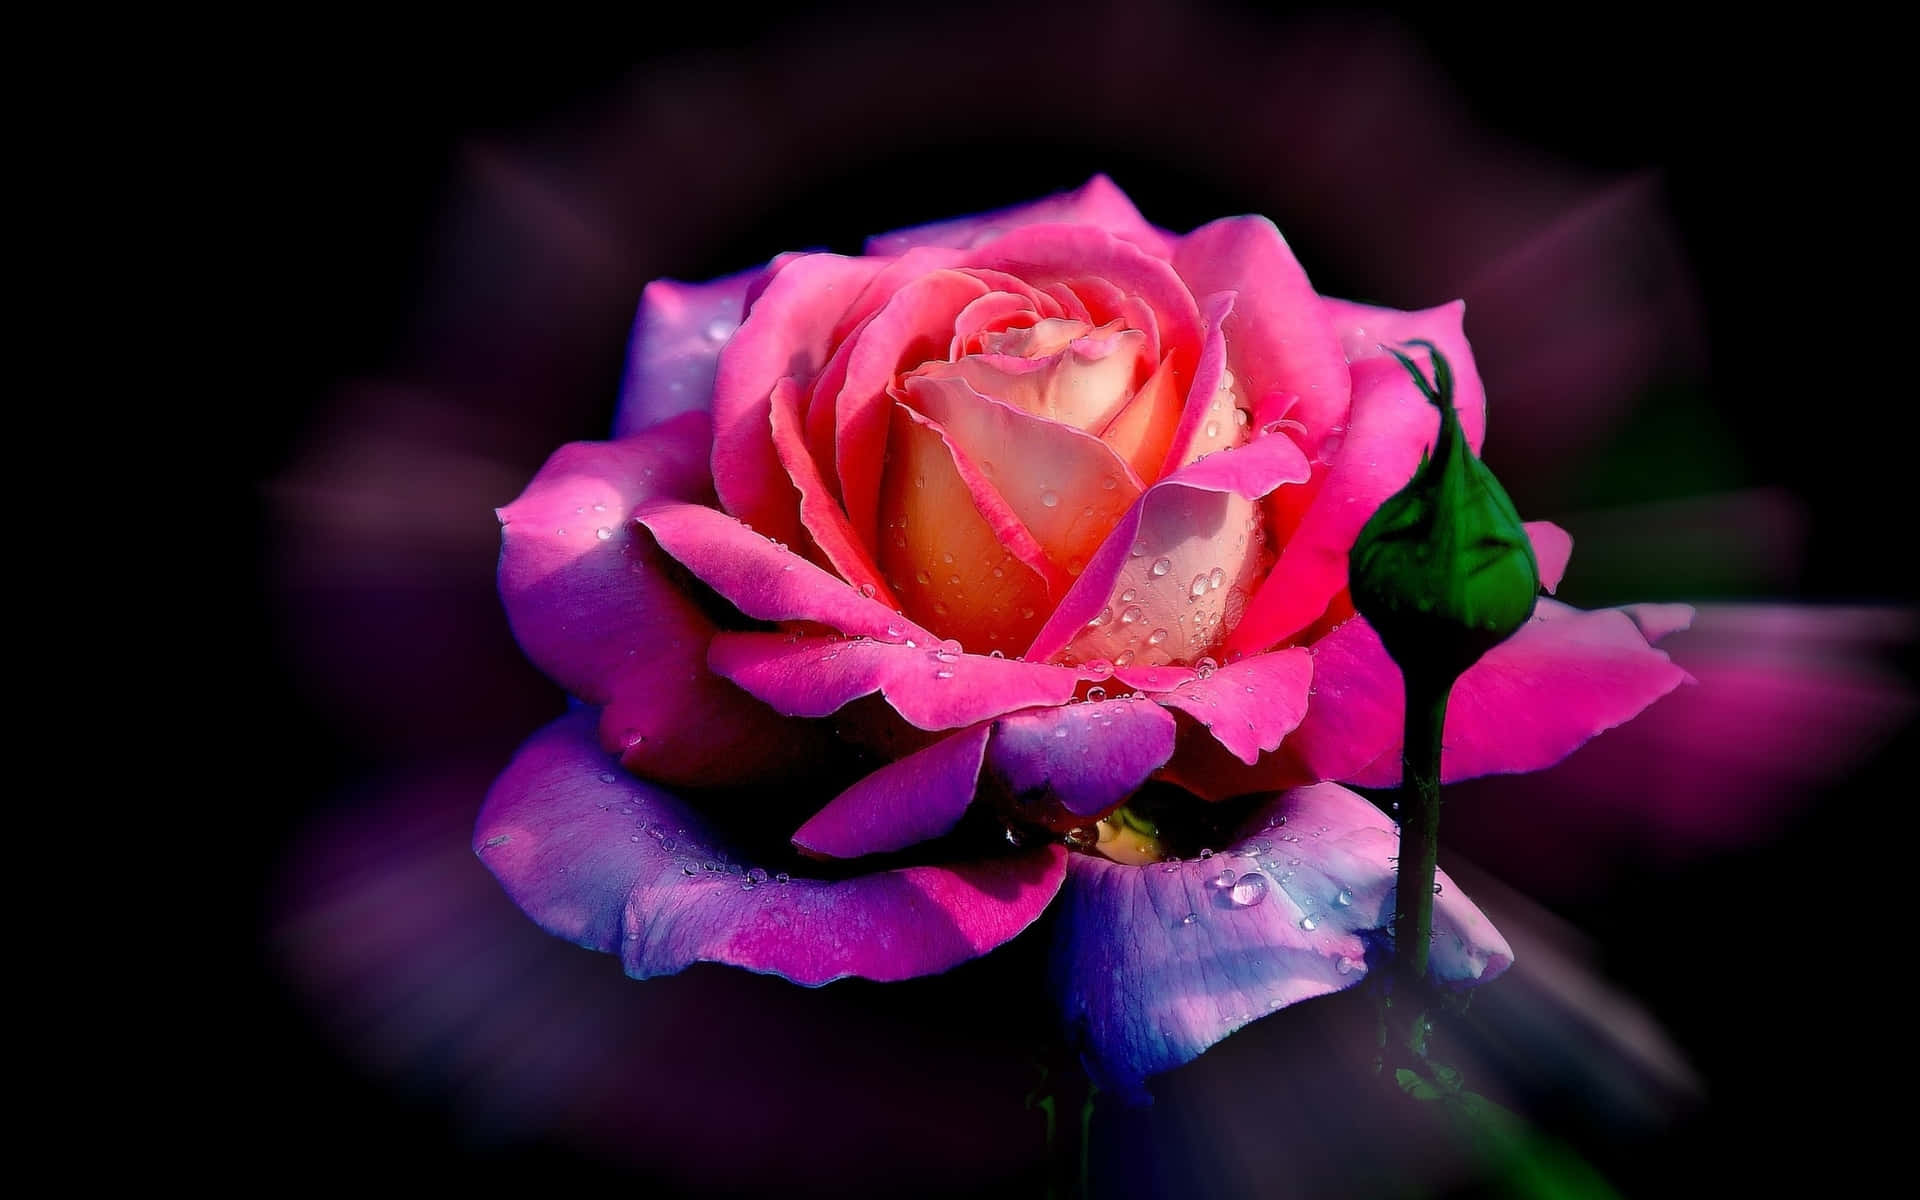 A Pink Rose With Water Drops On It